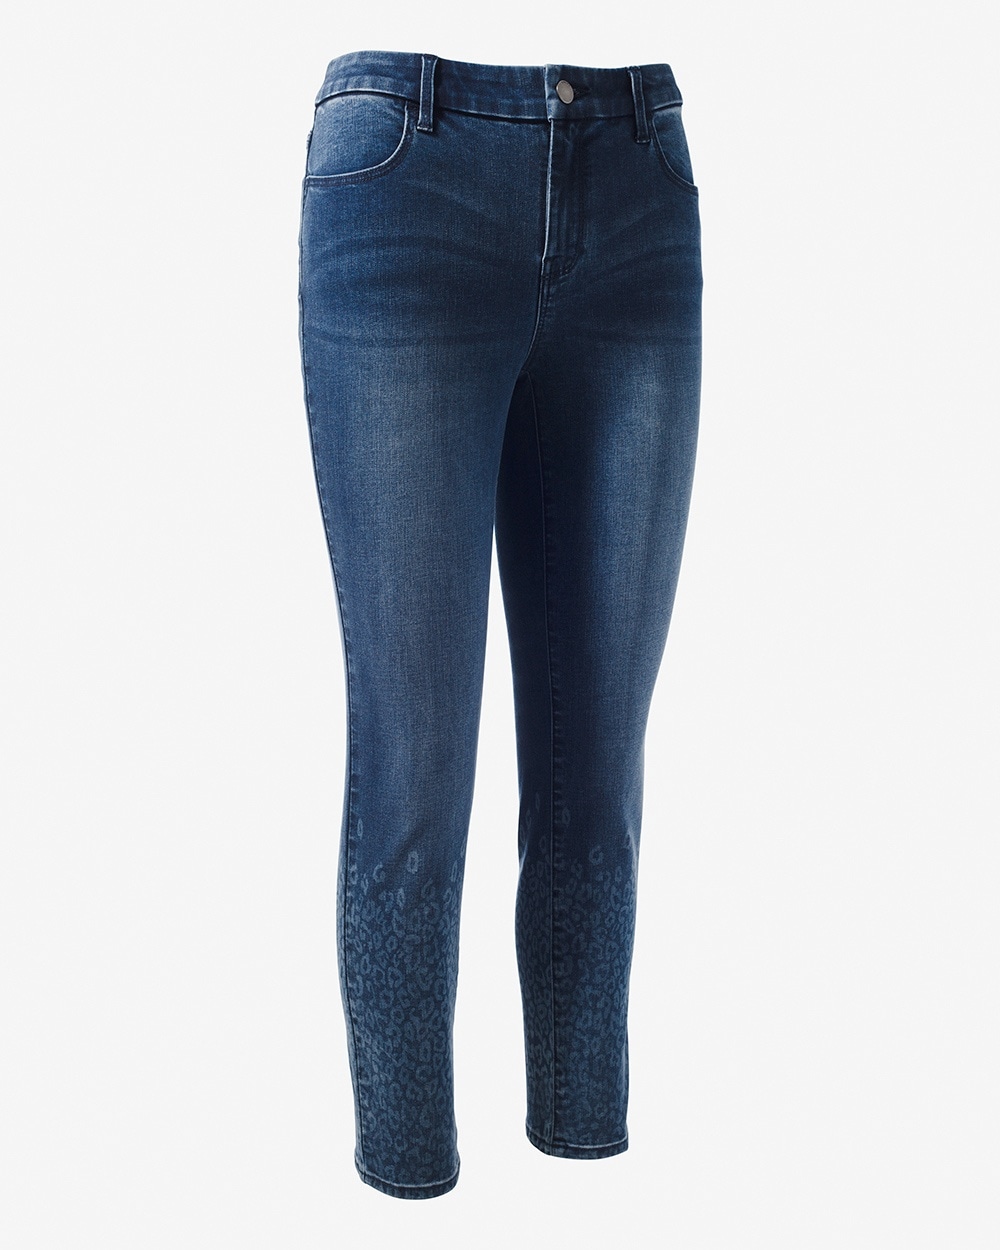 Ombr&#233 Animal Girlfriend Ankle Jeans